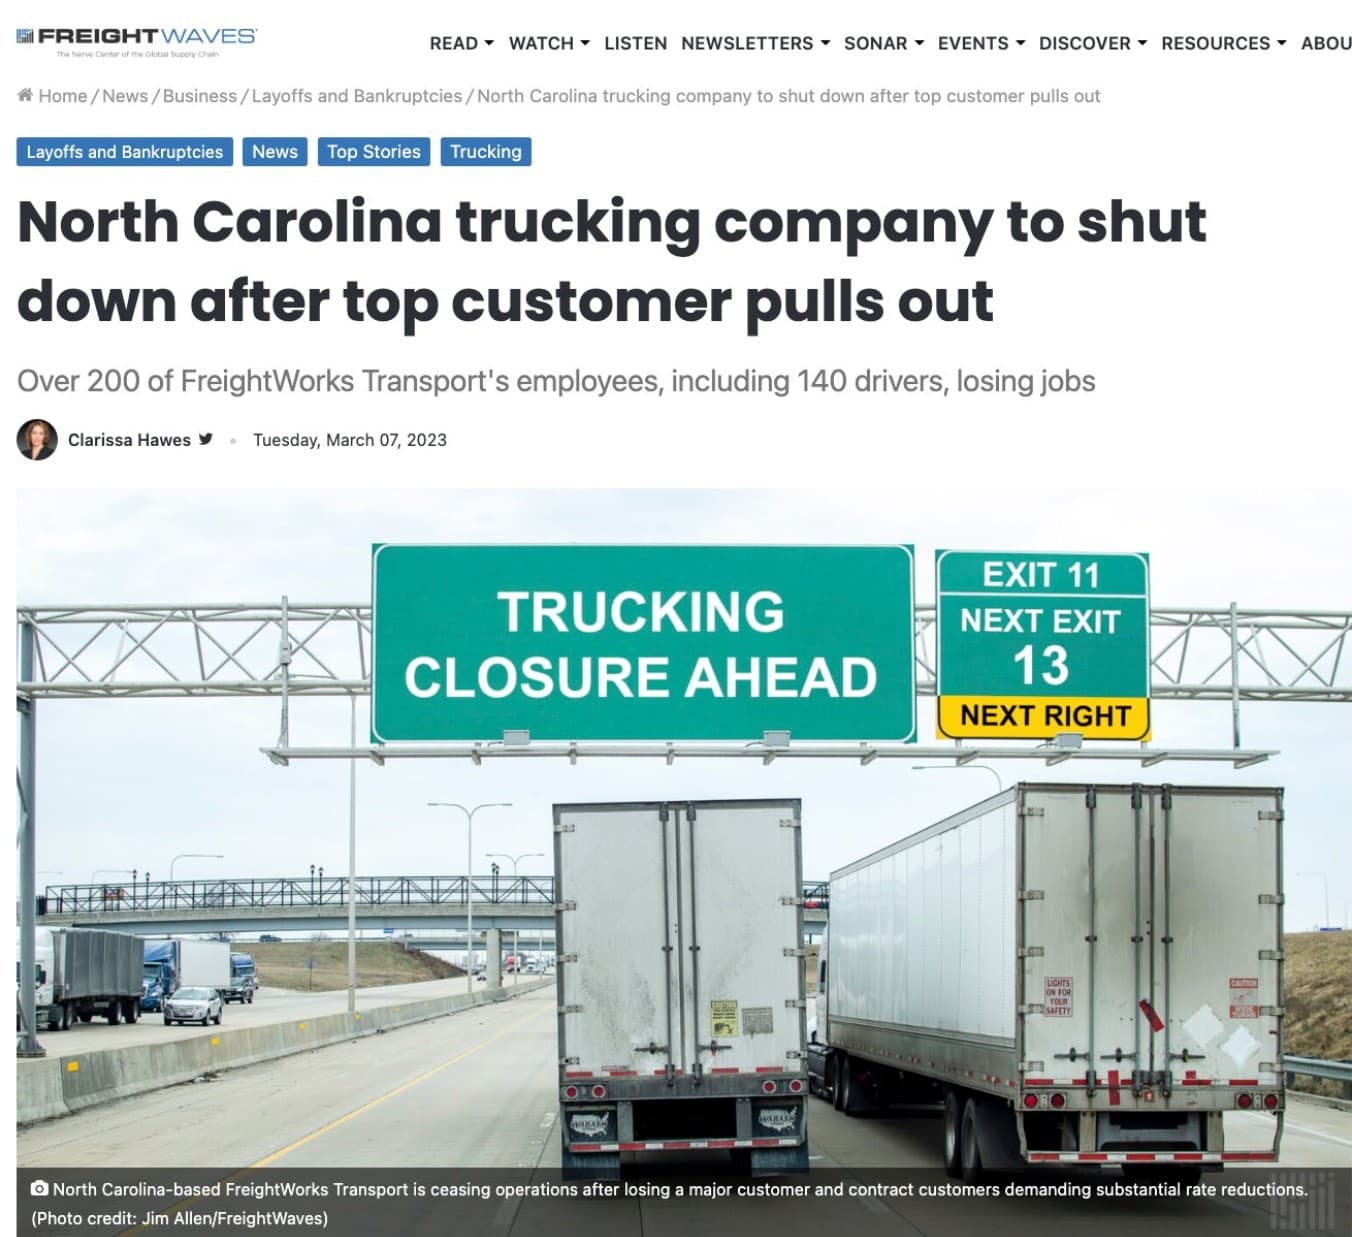 200 employees lose their jobs when FreightWorks transport shuts down